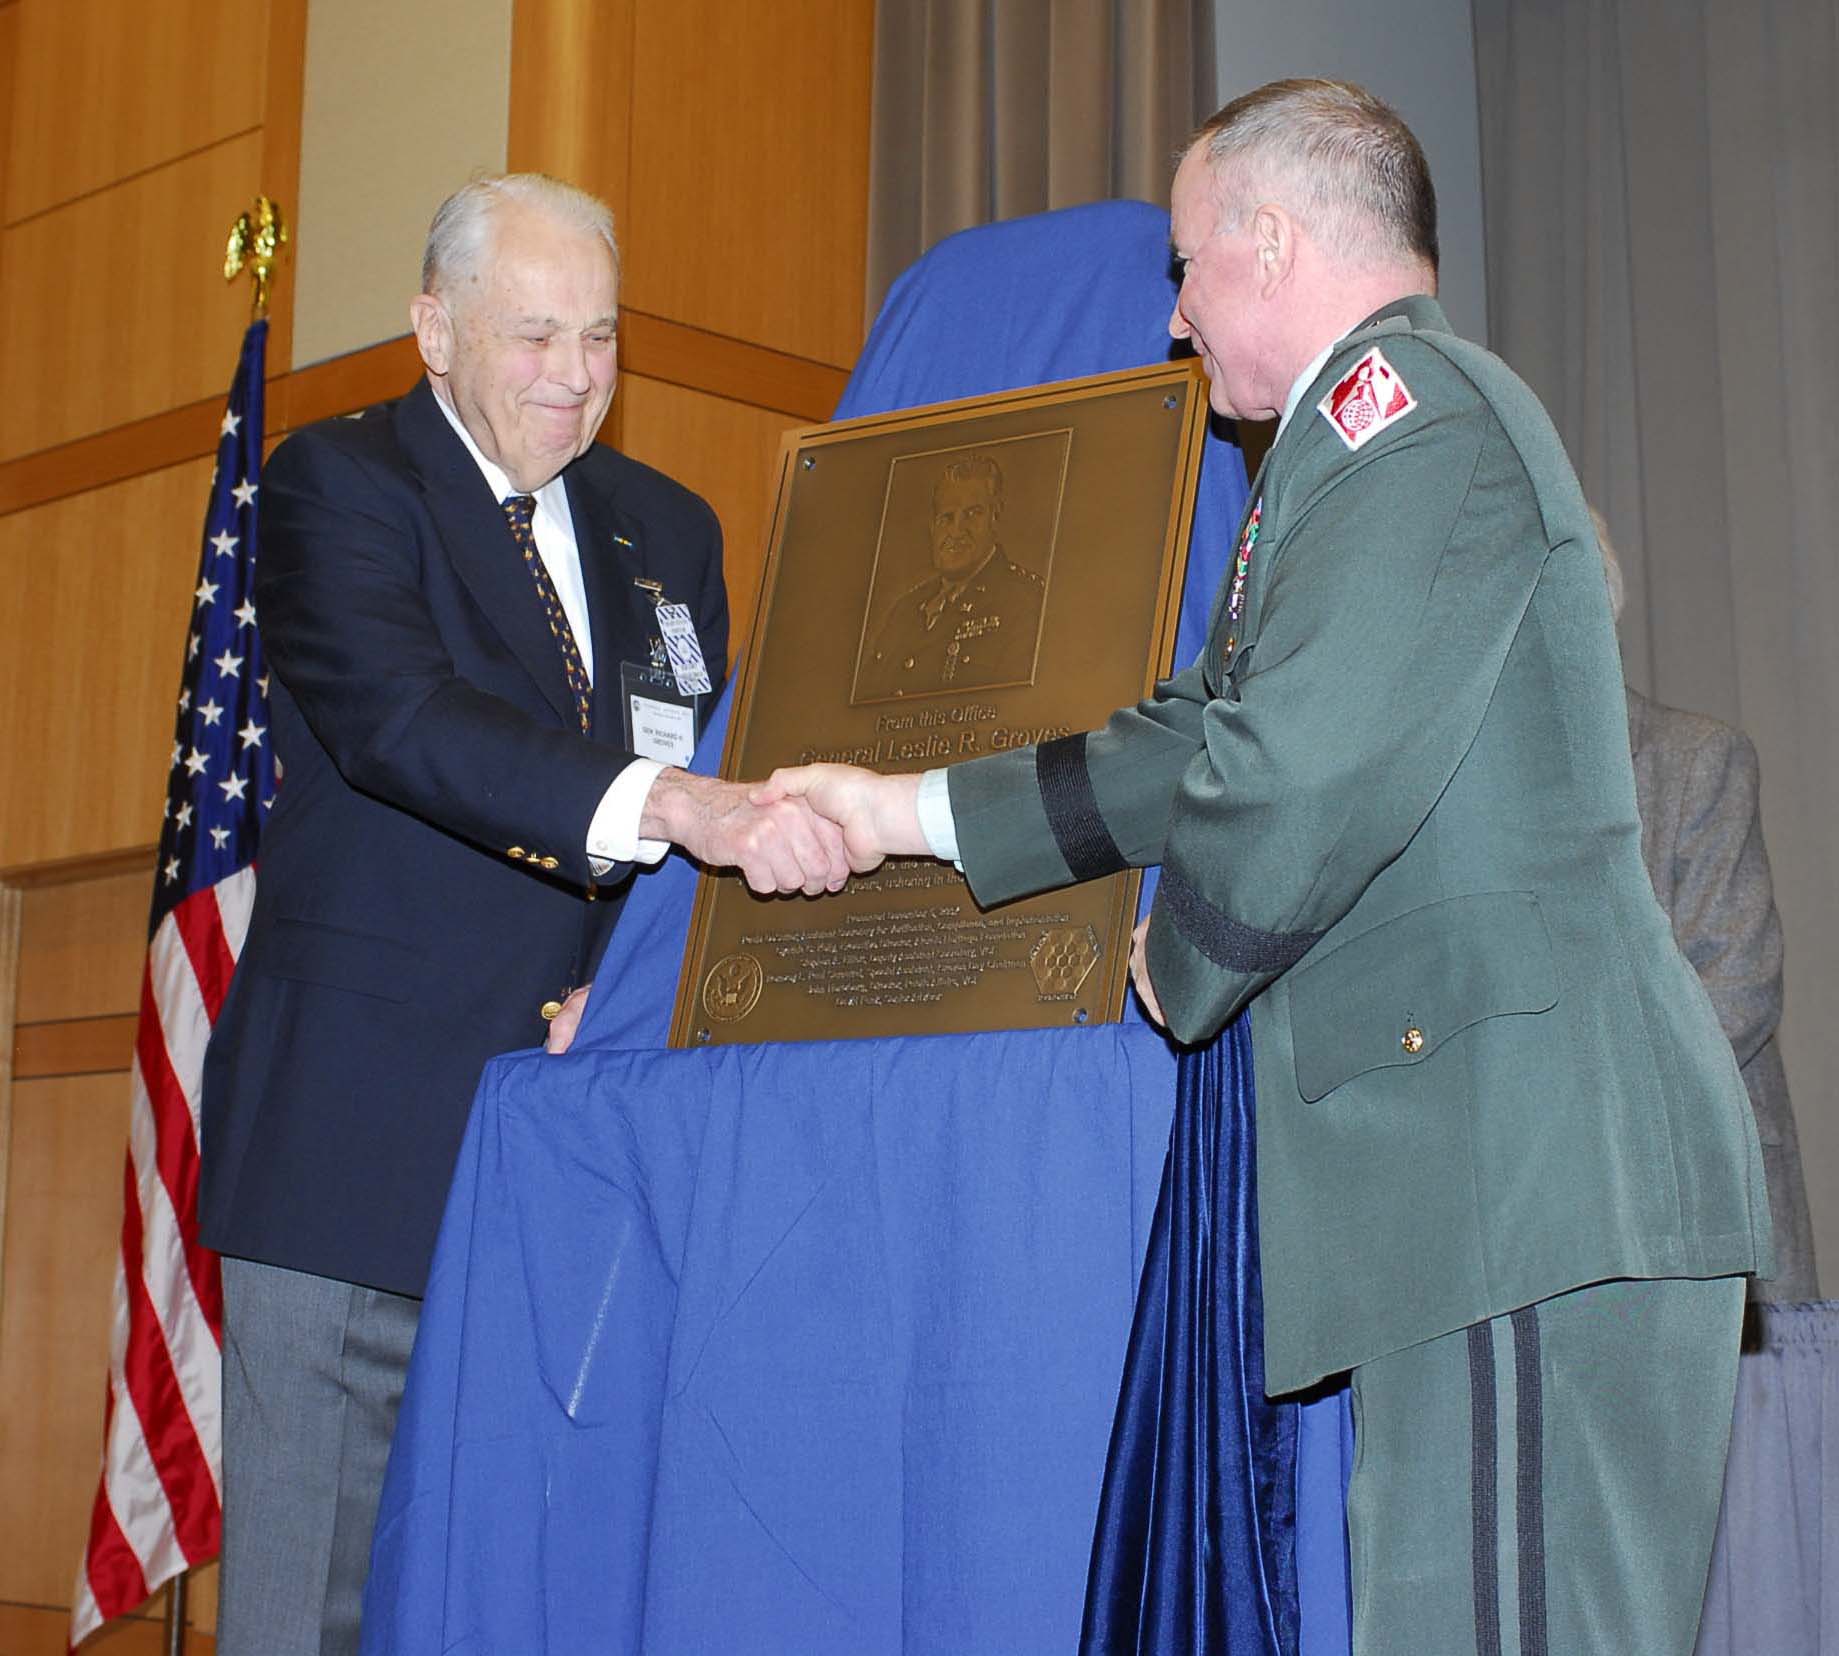 General Richard H. Groves receiving a plaque honoring his father from Major General Merdith W. B. Temple of the Army Corps of Engineers